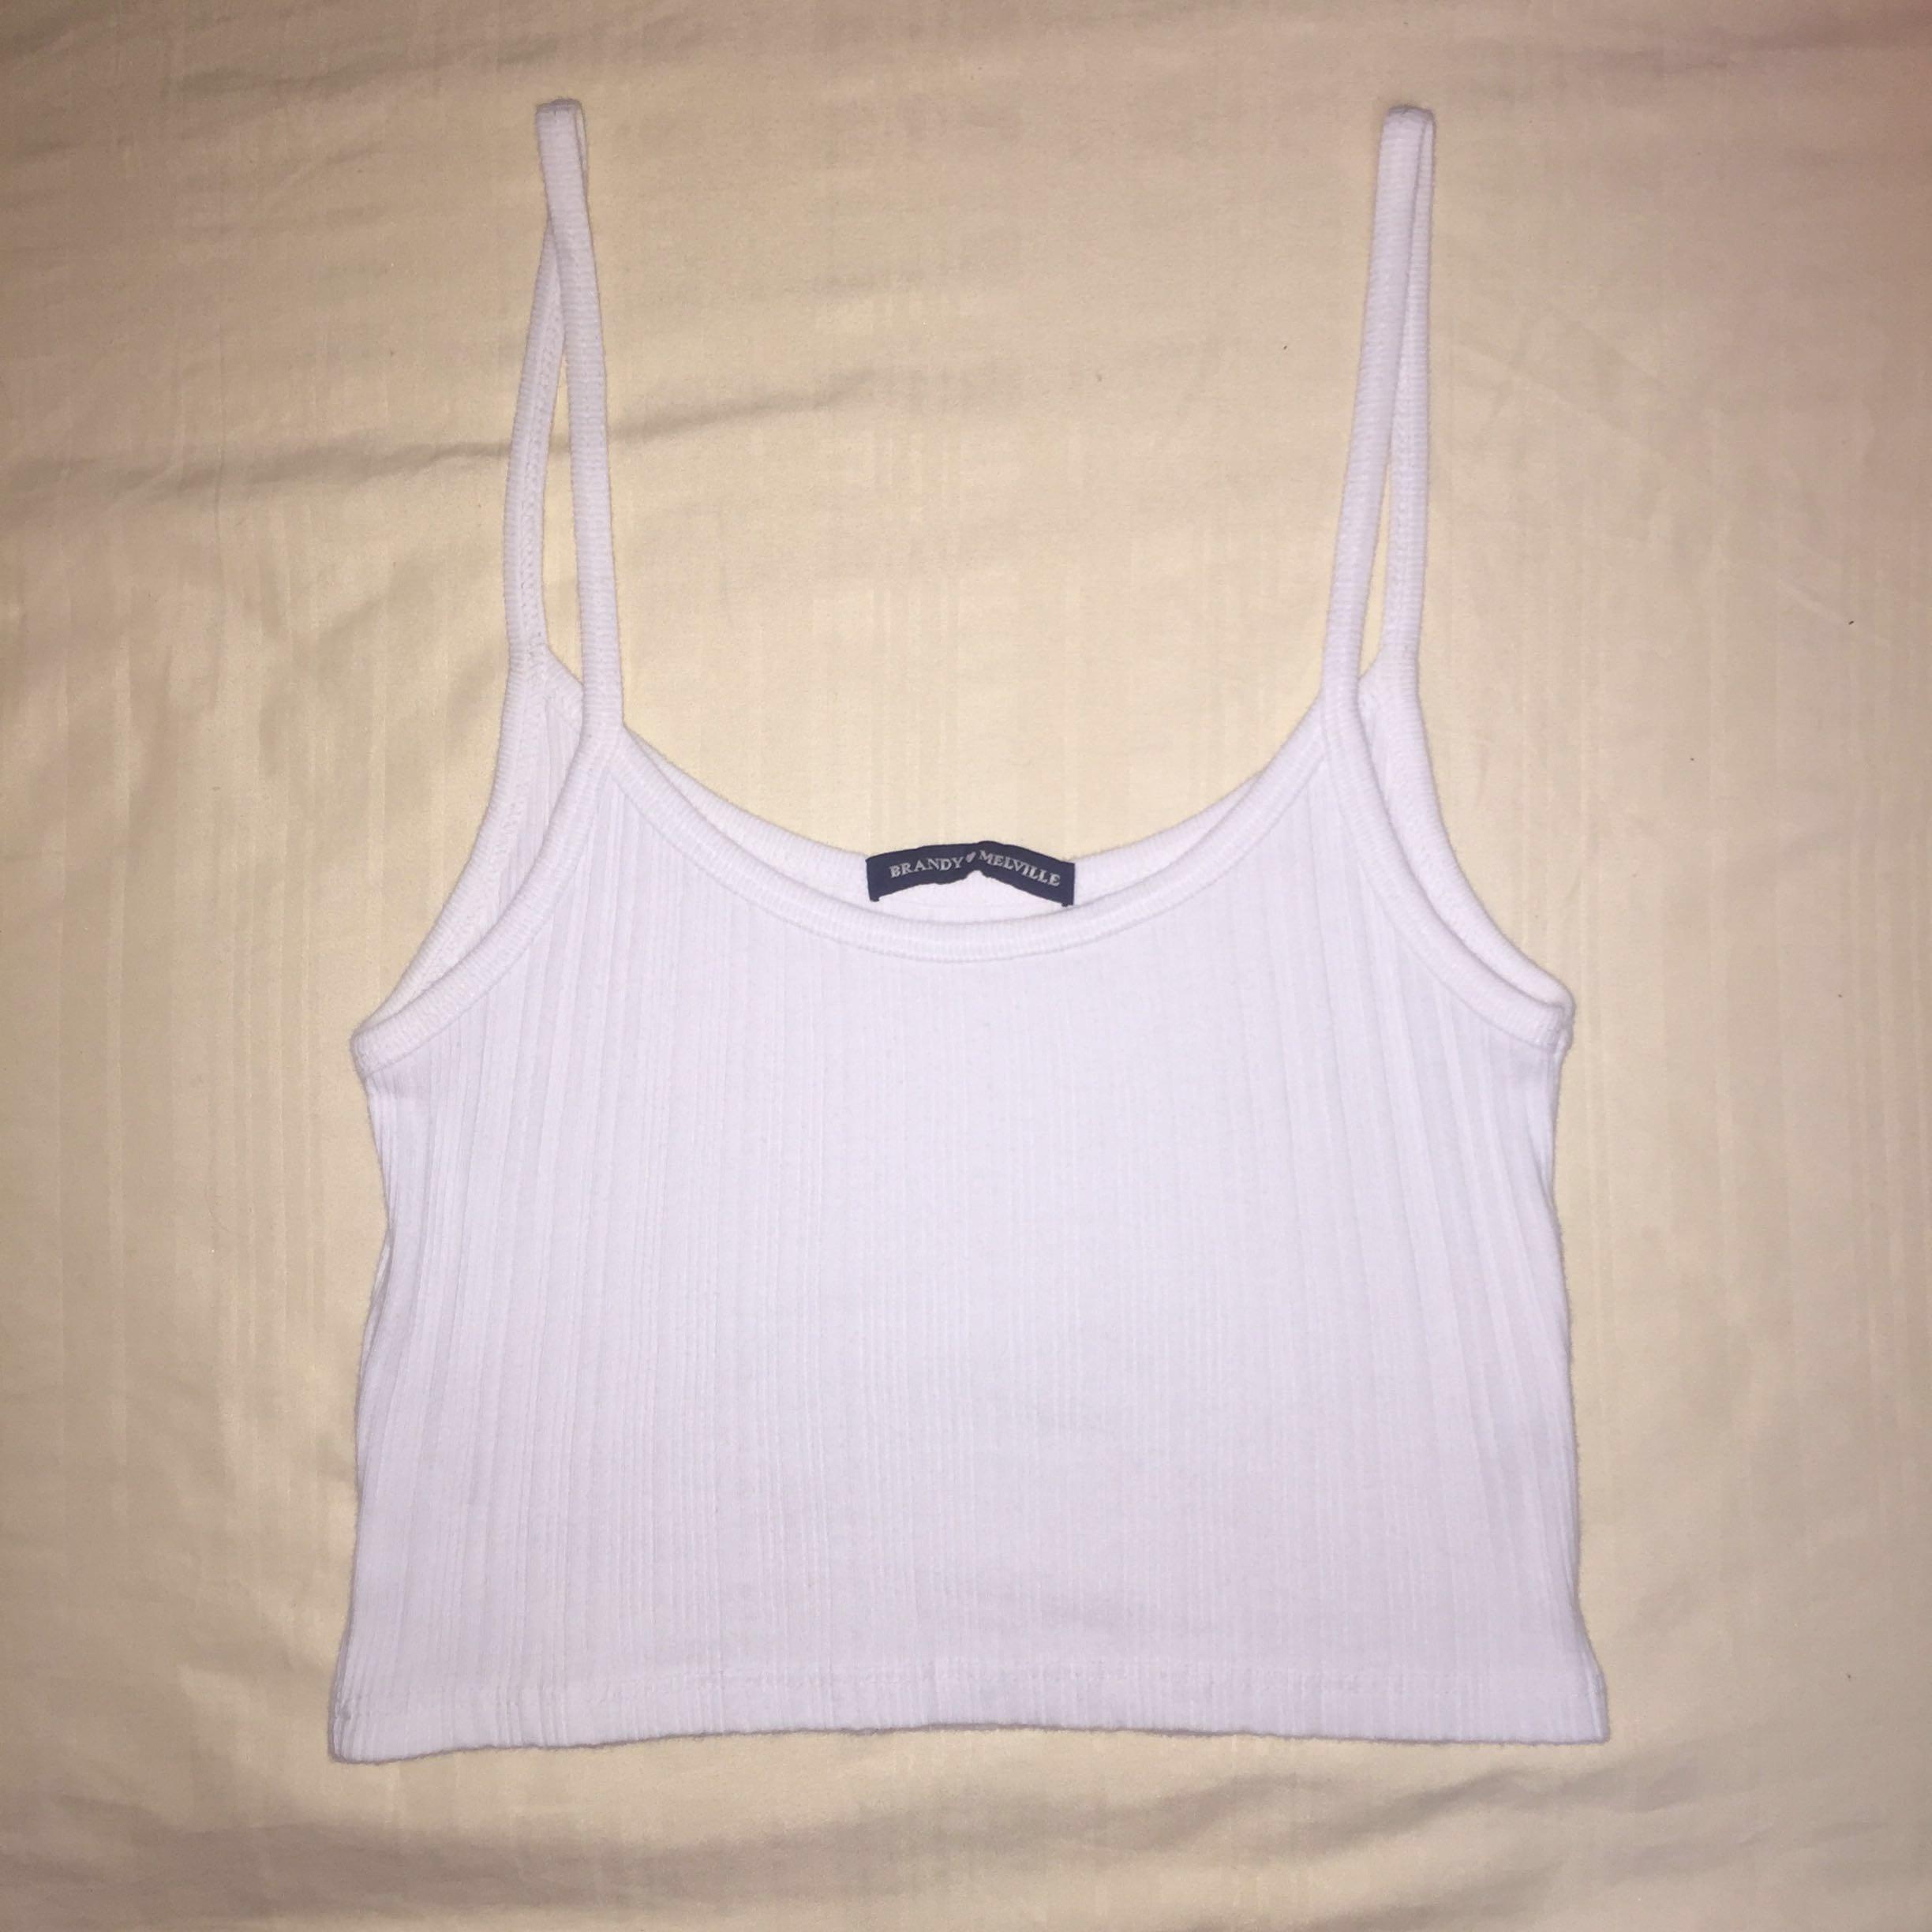 Brandy Melville White Ribbed Skylar Tank Women S Fashion Tops Other Tops On Carousell